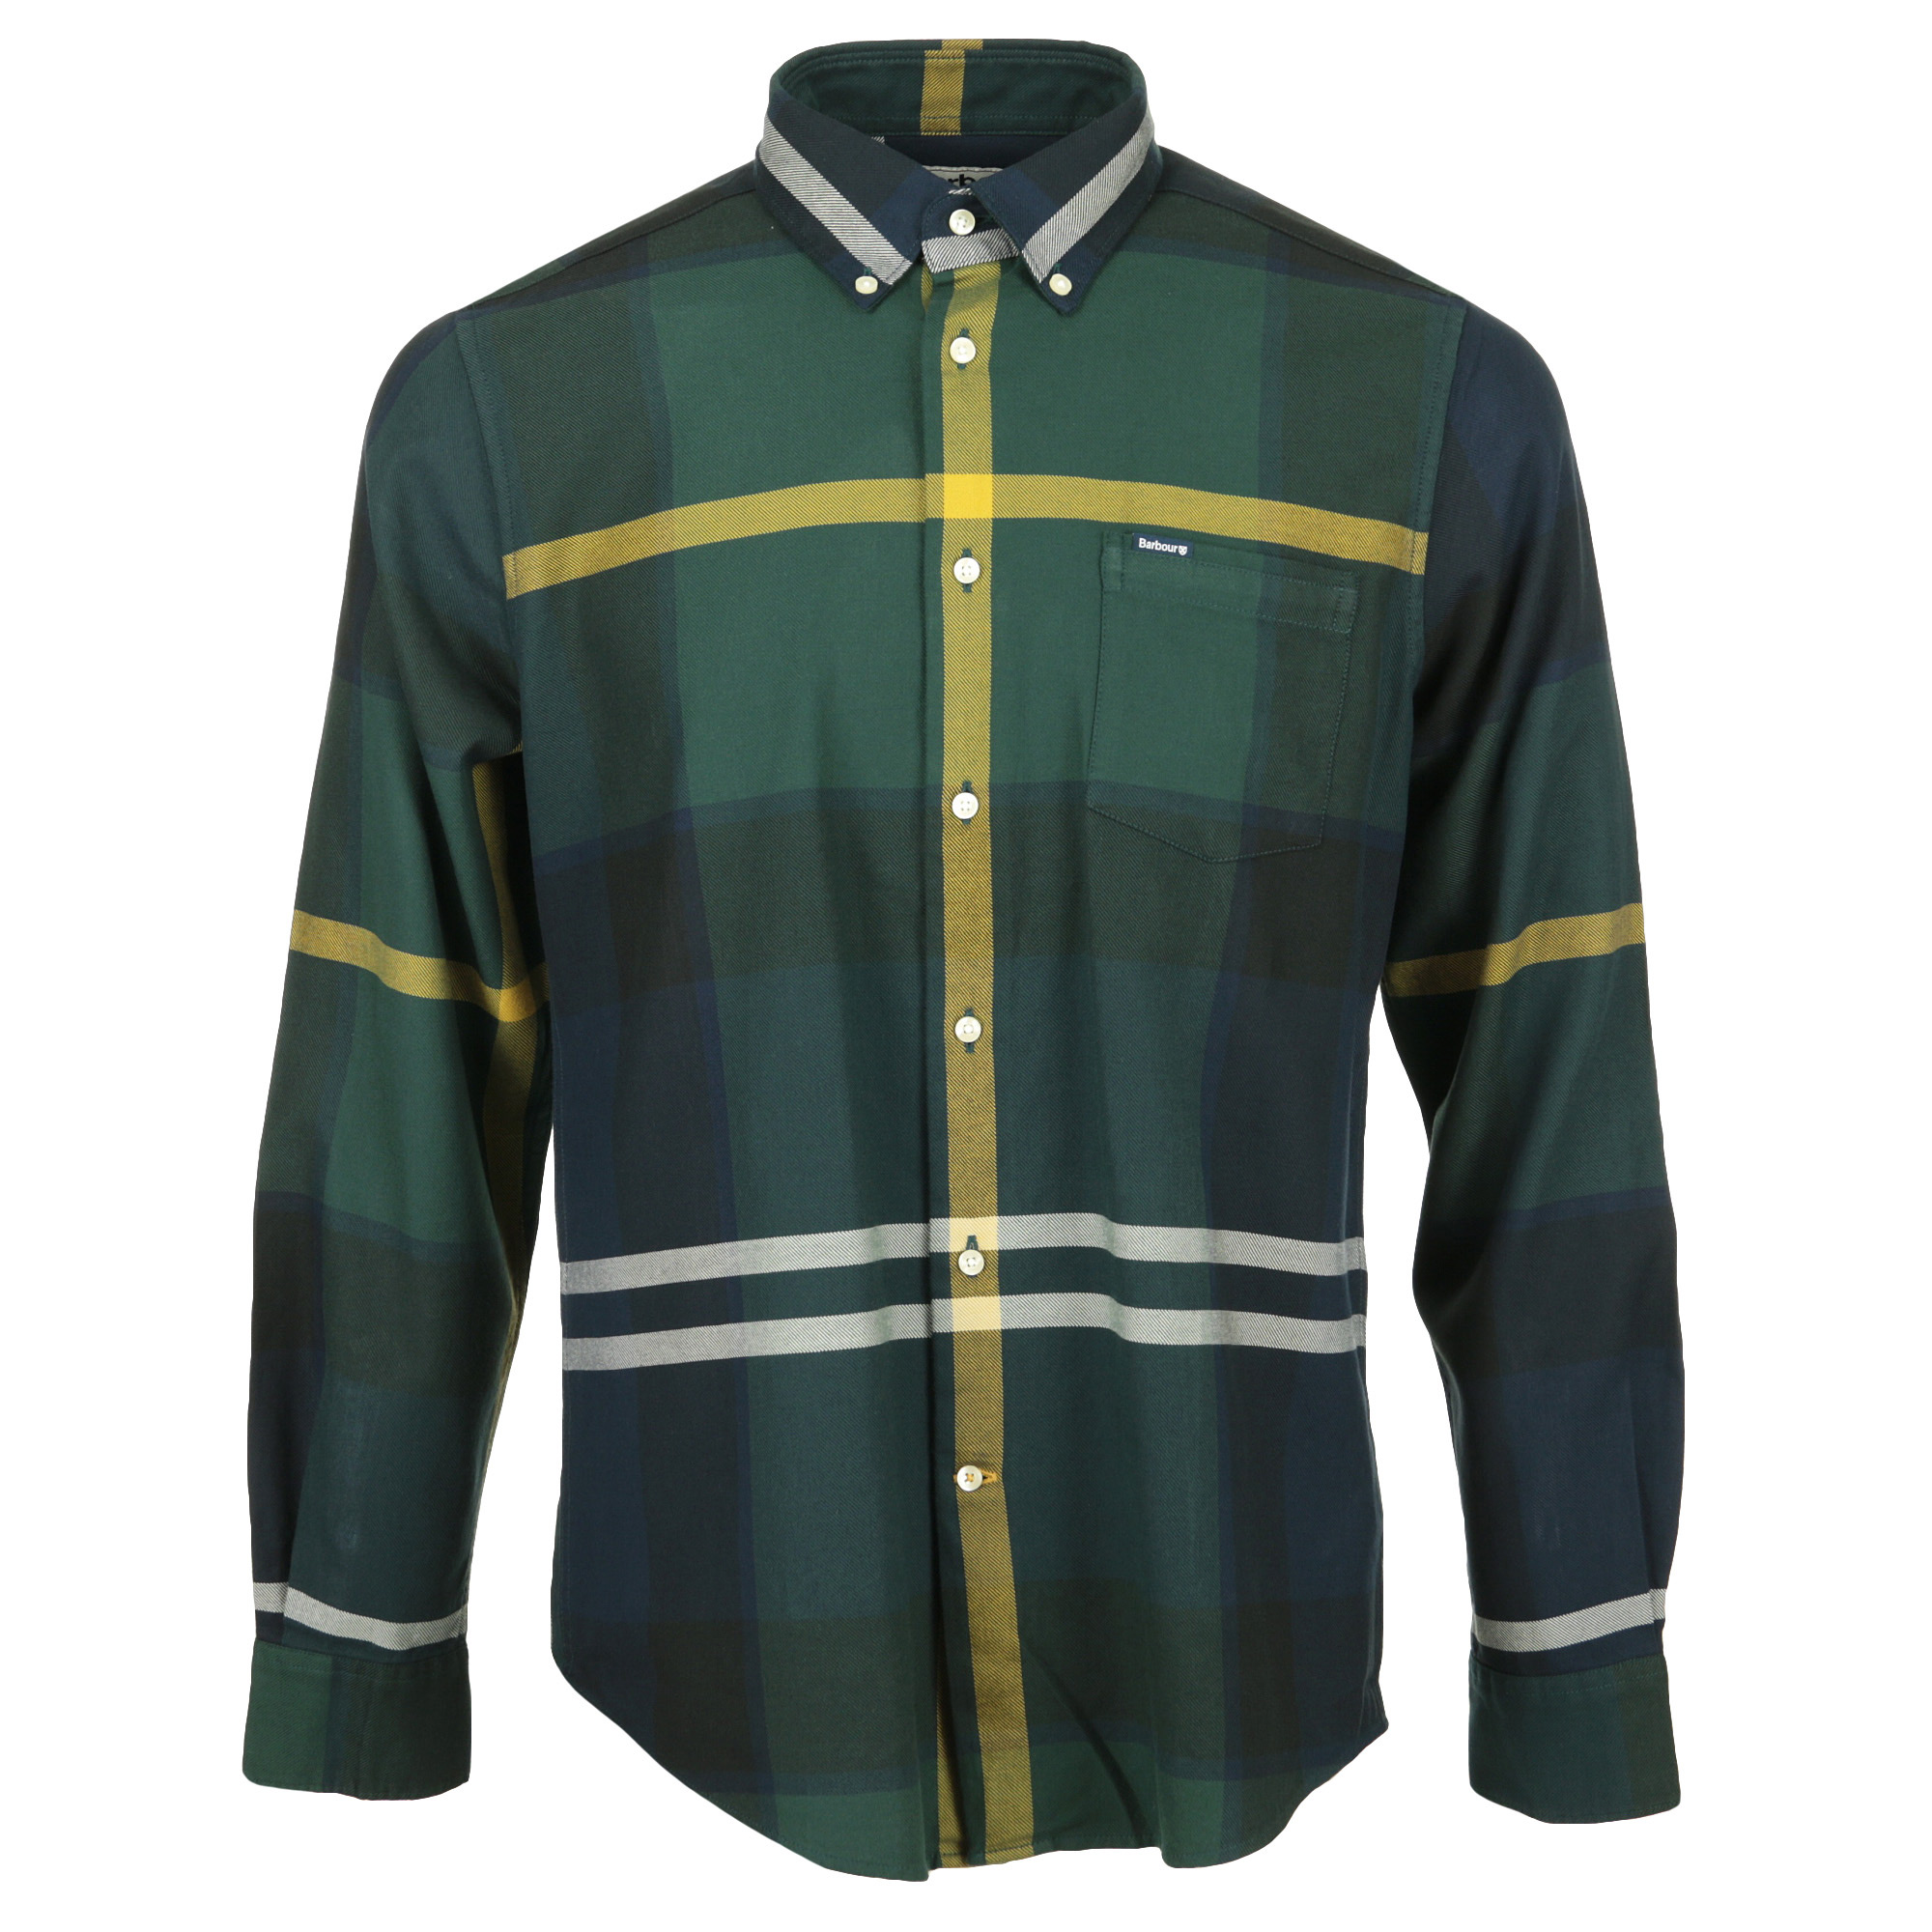 Barbour "Dunoon Tailored Shirt"